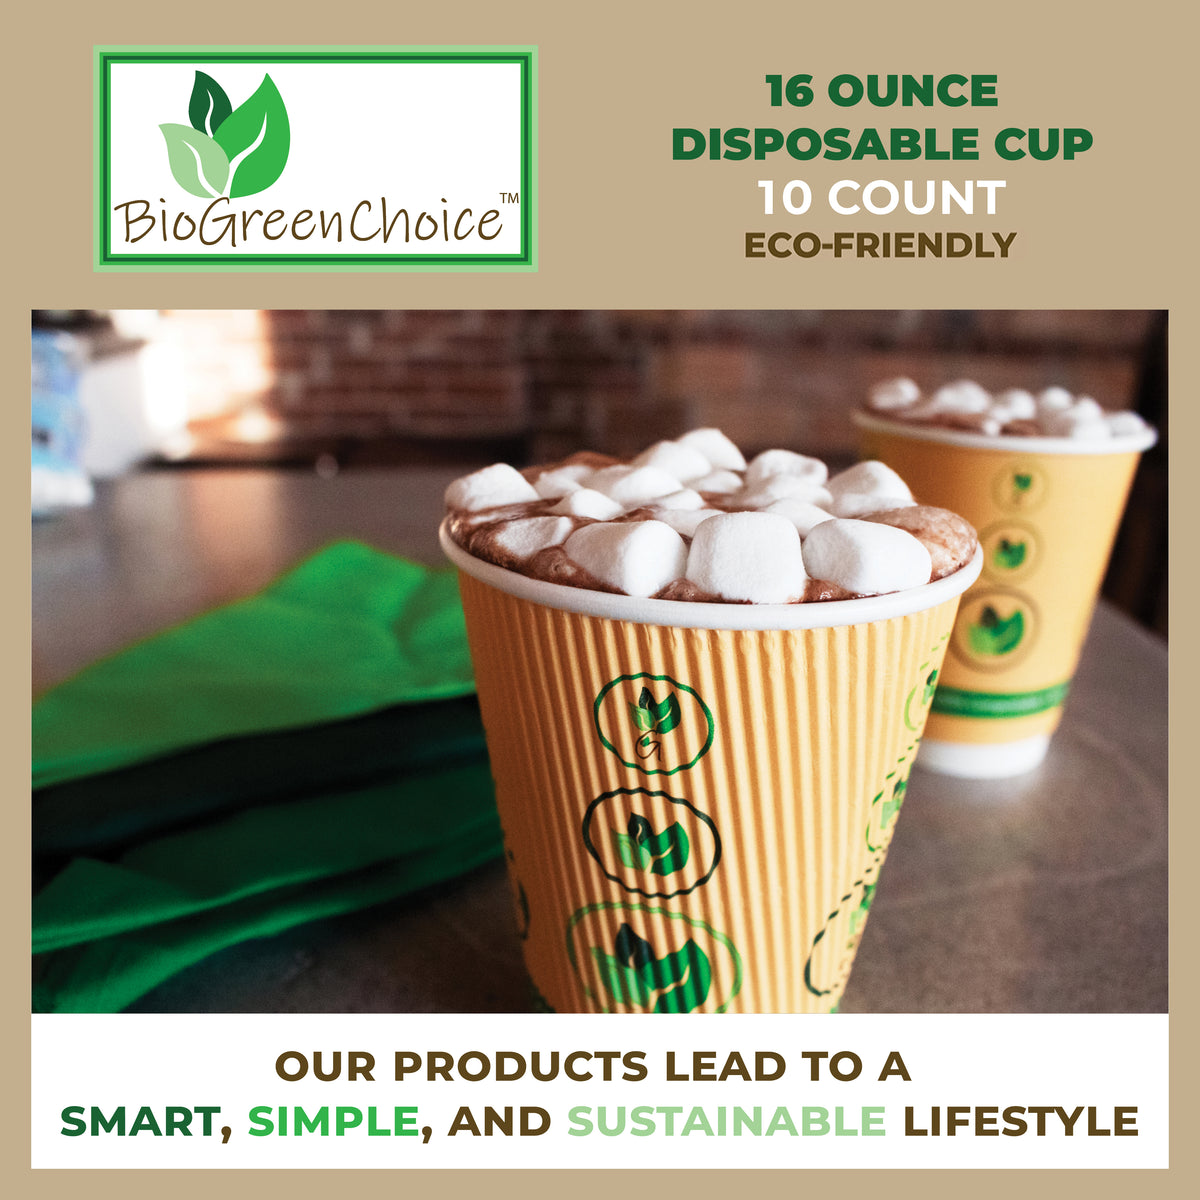 Whether disposable paper cups are more environmentally friendly